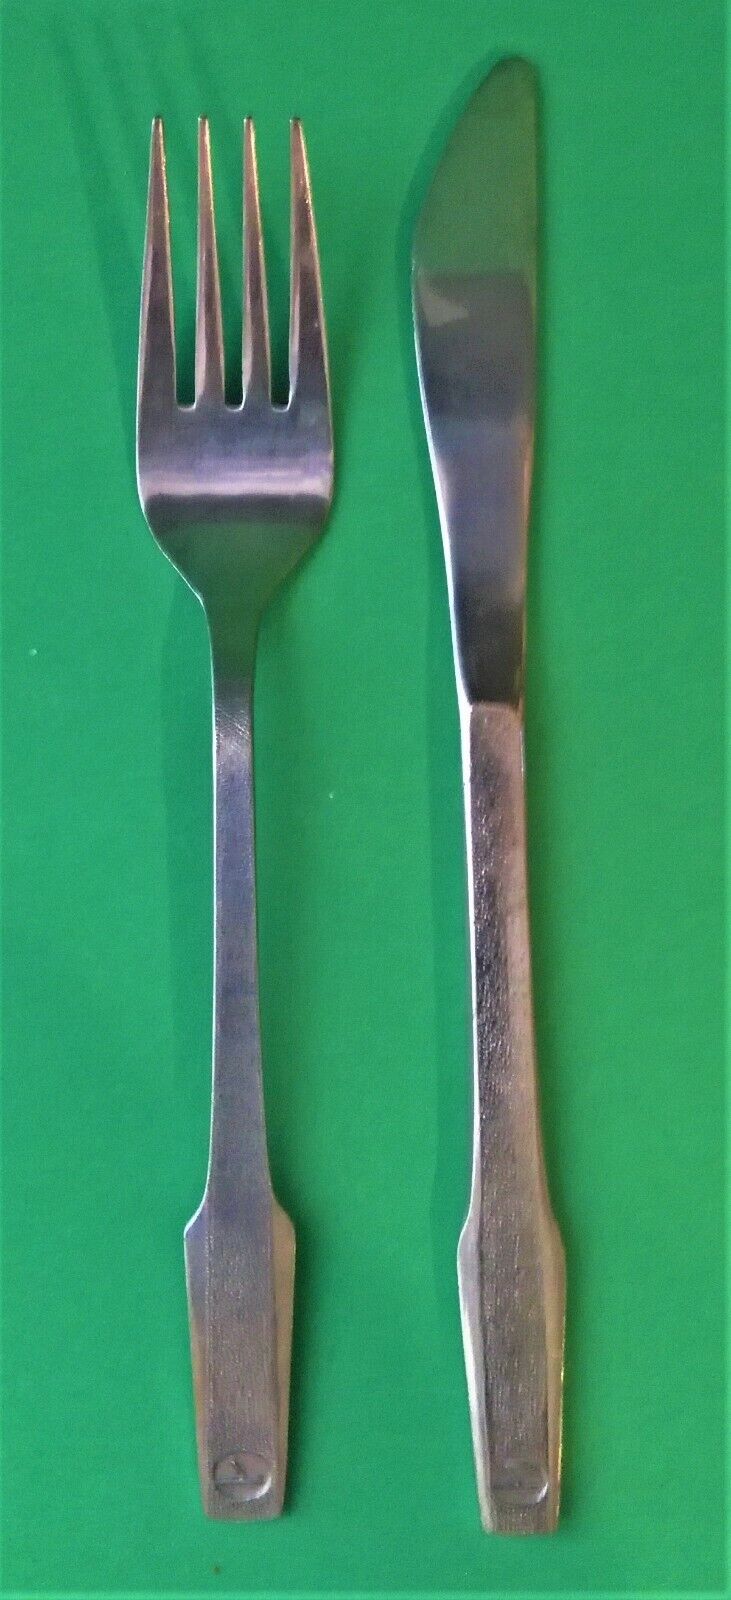 EASTERN AIRLINES LOGO SILVERWARE FORK AND KNIFE VINTAGE 1980'S